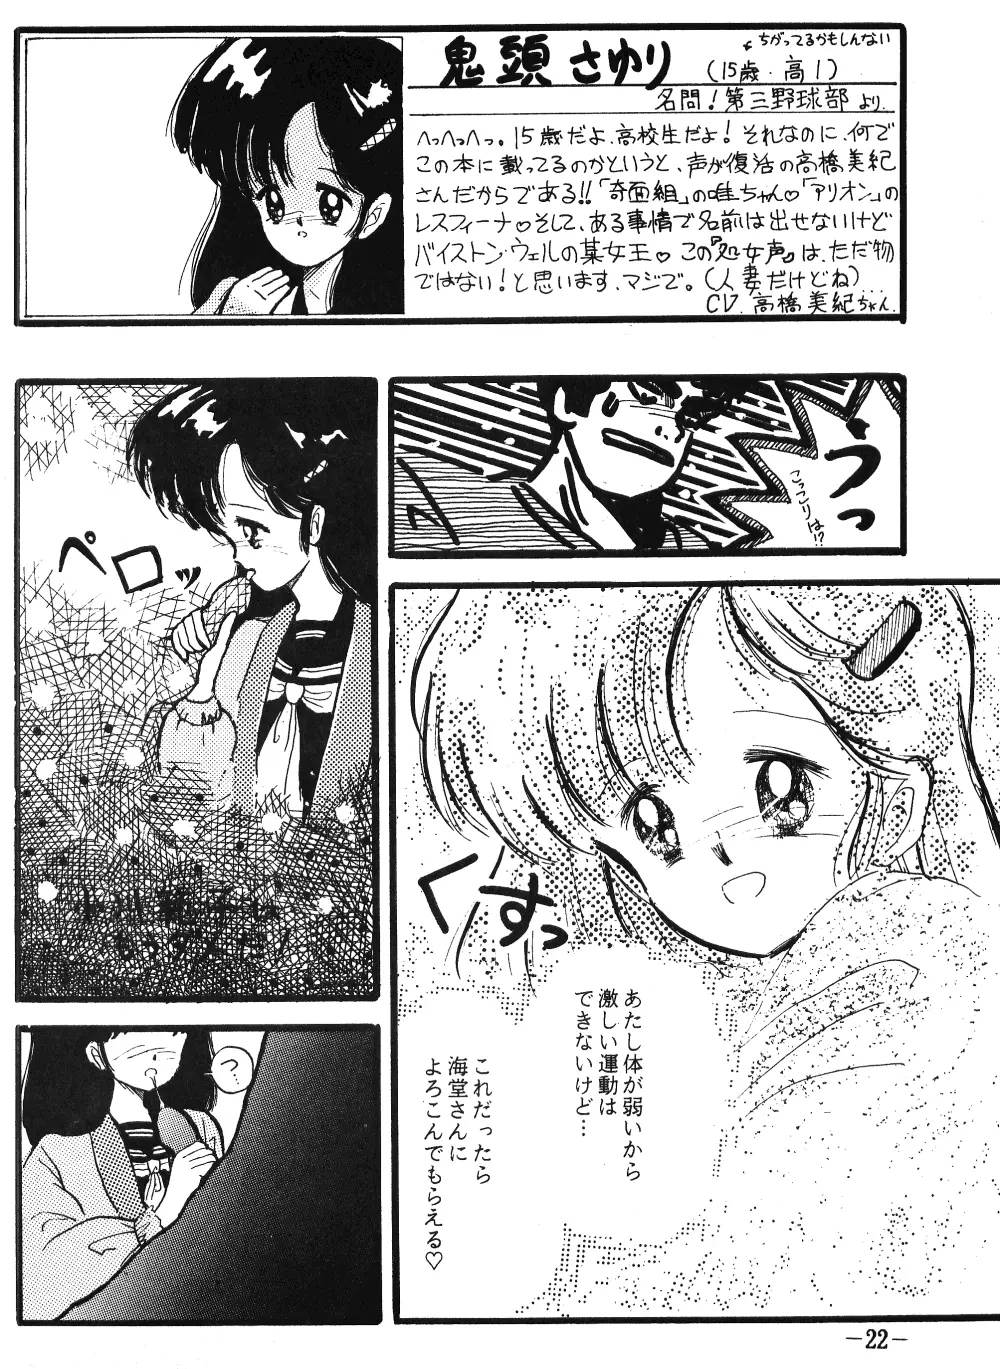 Fro2 Fight Vol. 1 Page.22